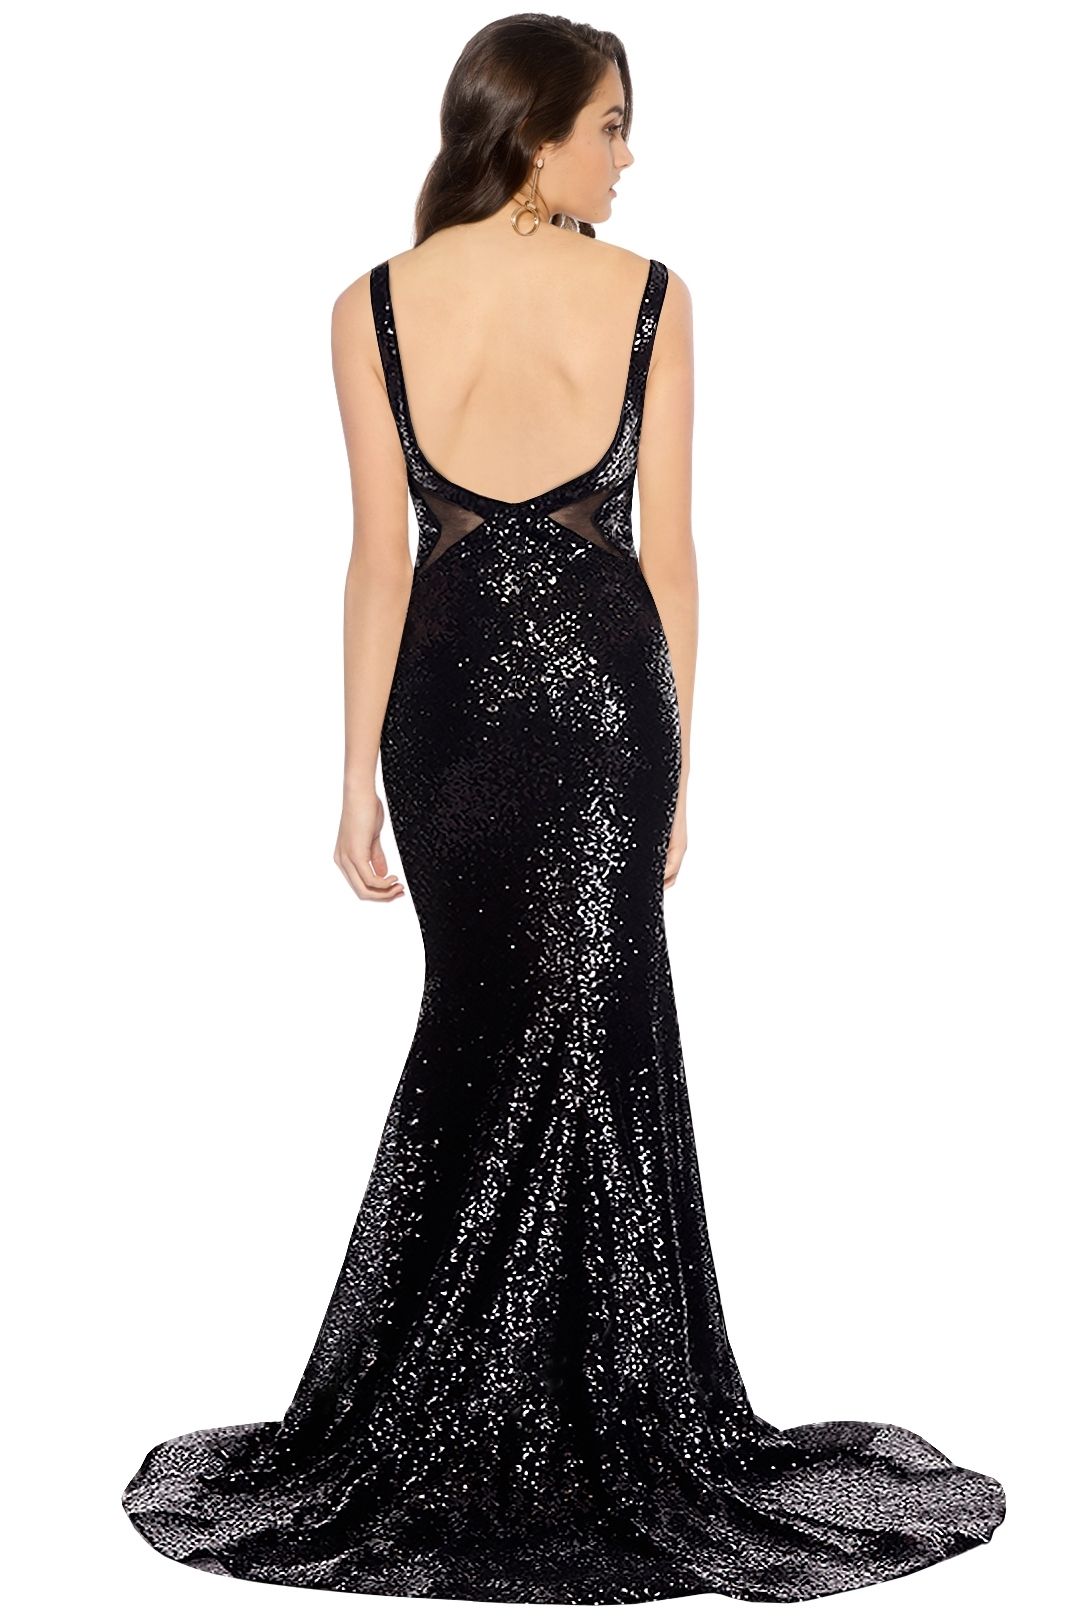 Tinaholy - Midnight Sequin Gown - Black - Back